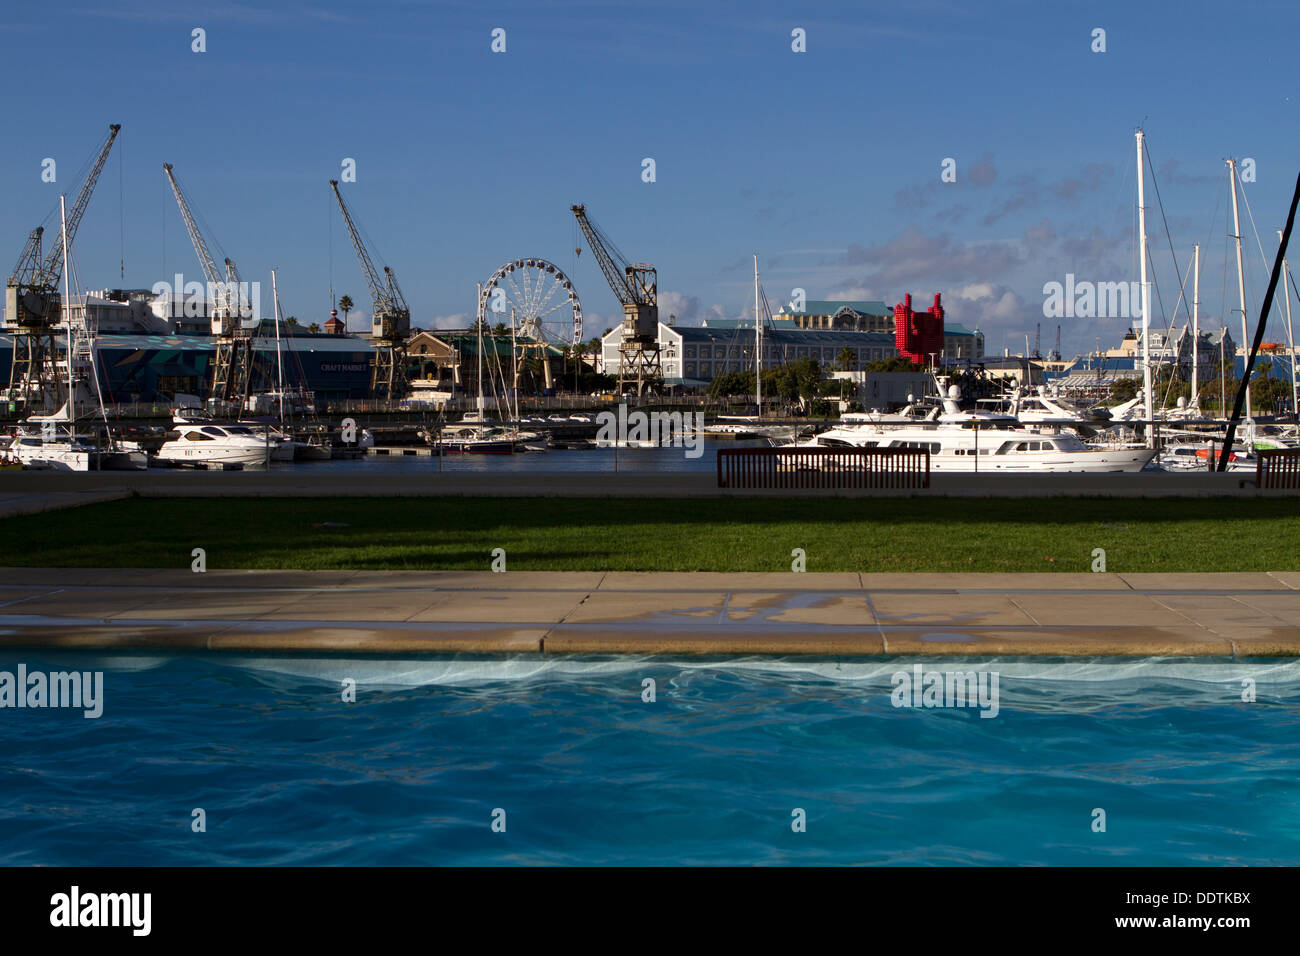 Cape Town Waterfront, seen from a swimming pool. Stock Photo